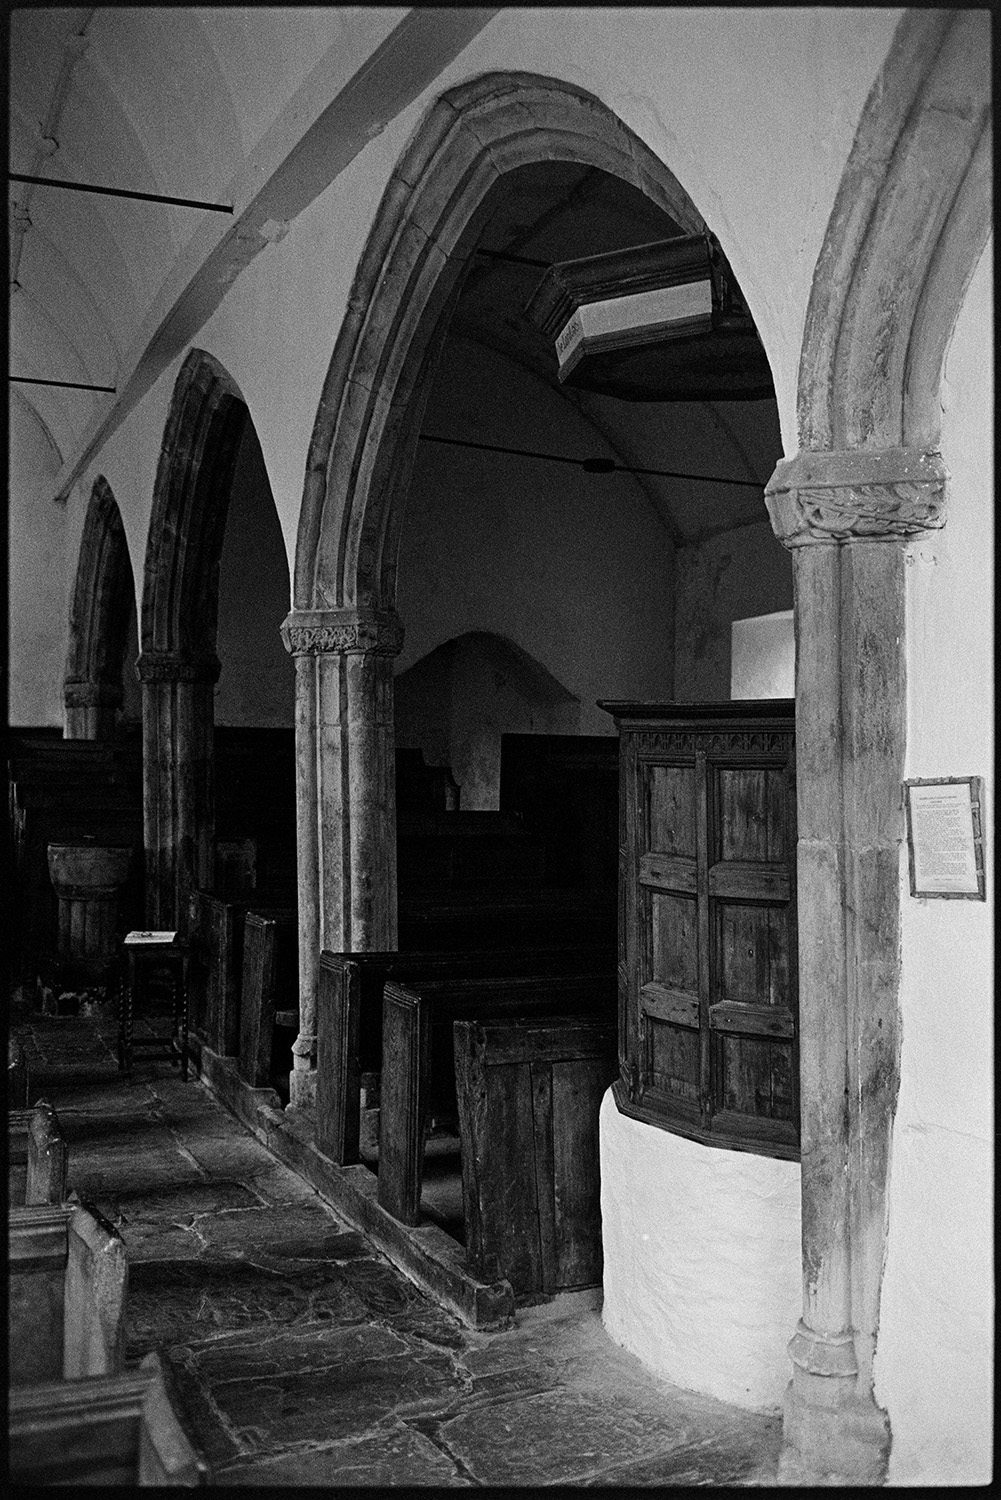 Interior and exterior of redundant church.
[The interior of a redundant church at Parracombe, showing stone arches, a wooden pulpit and pews, and a flagstone floor.]